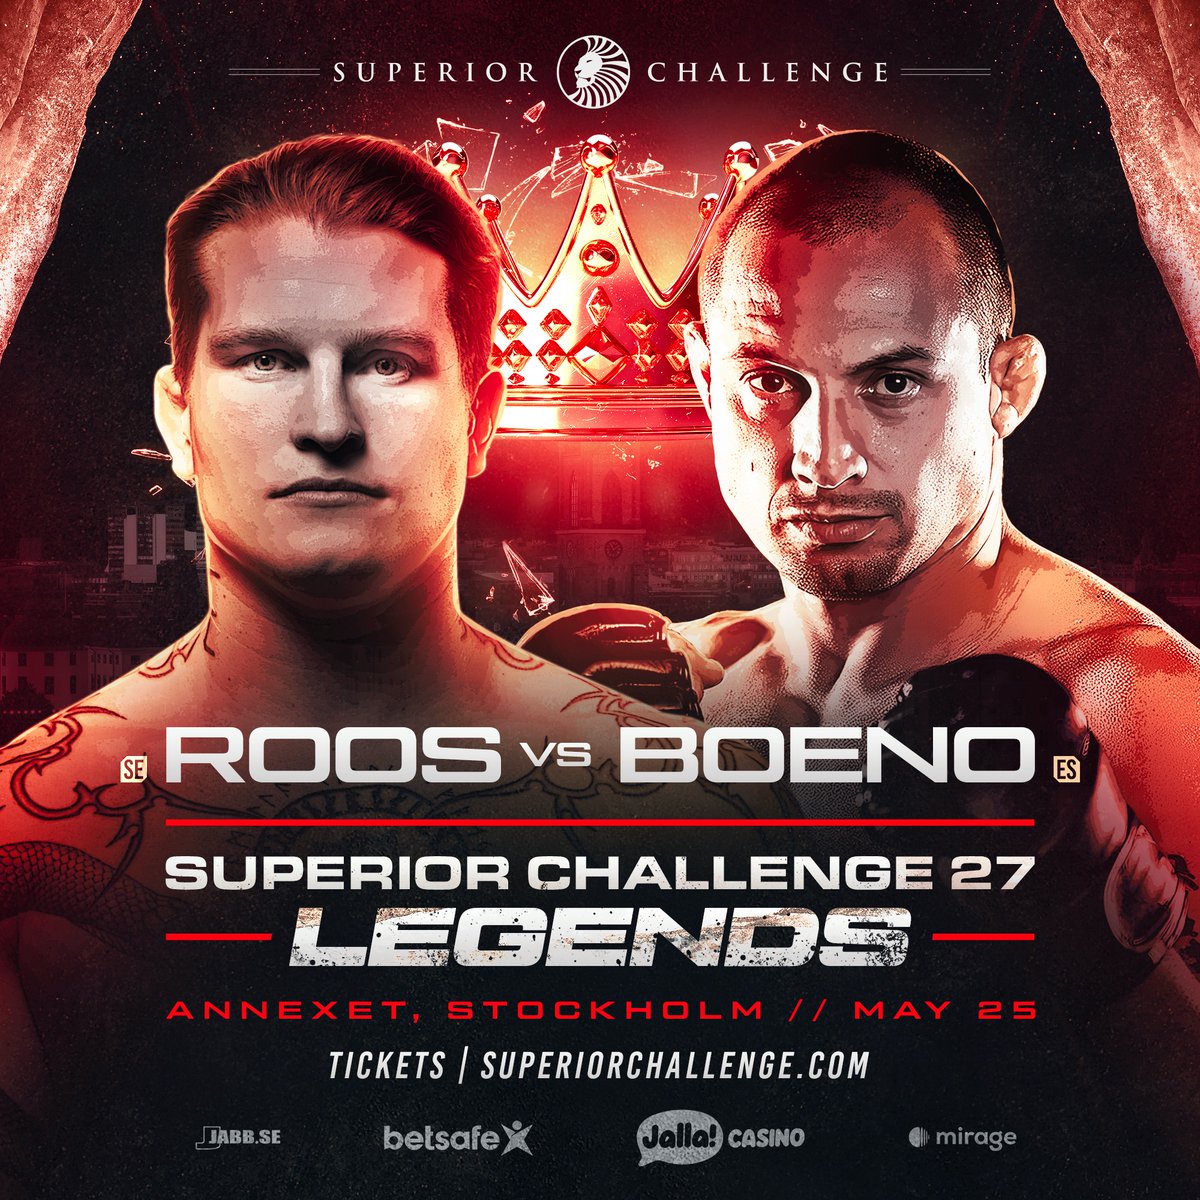 Robin Roos 🇸🇪 vs 🇧🇷 Jonas Boeno
Superior Challenge 27
May 25 - Annexet - Stockholm
Powered by @betsafe
#mma #superiorchallenge #mixedmartialarts